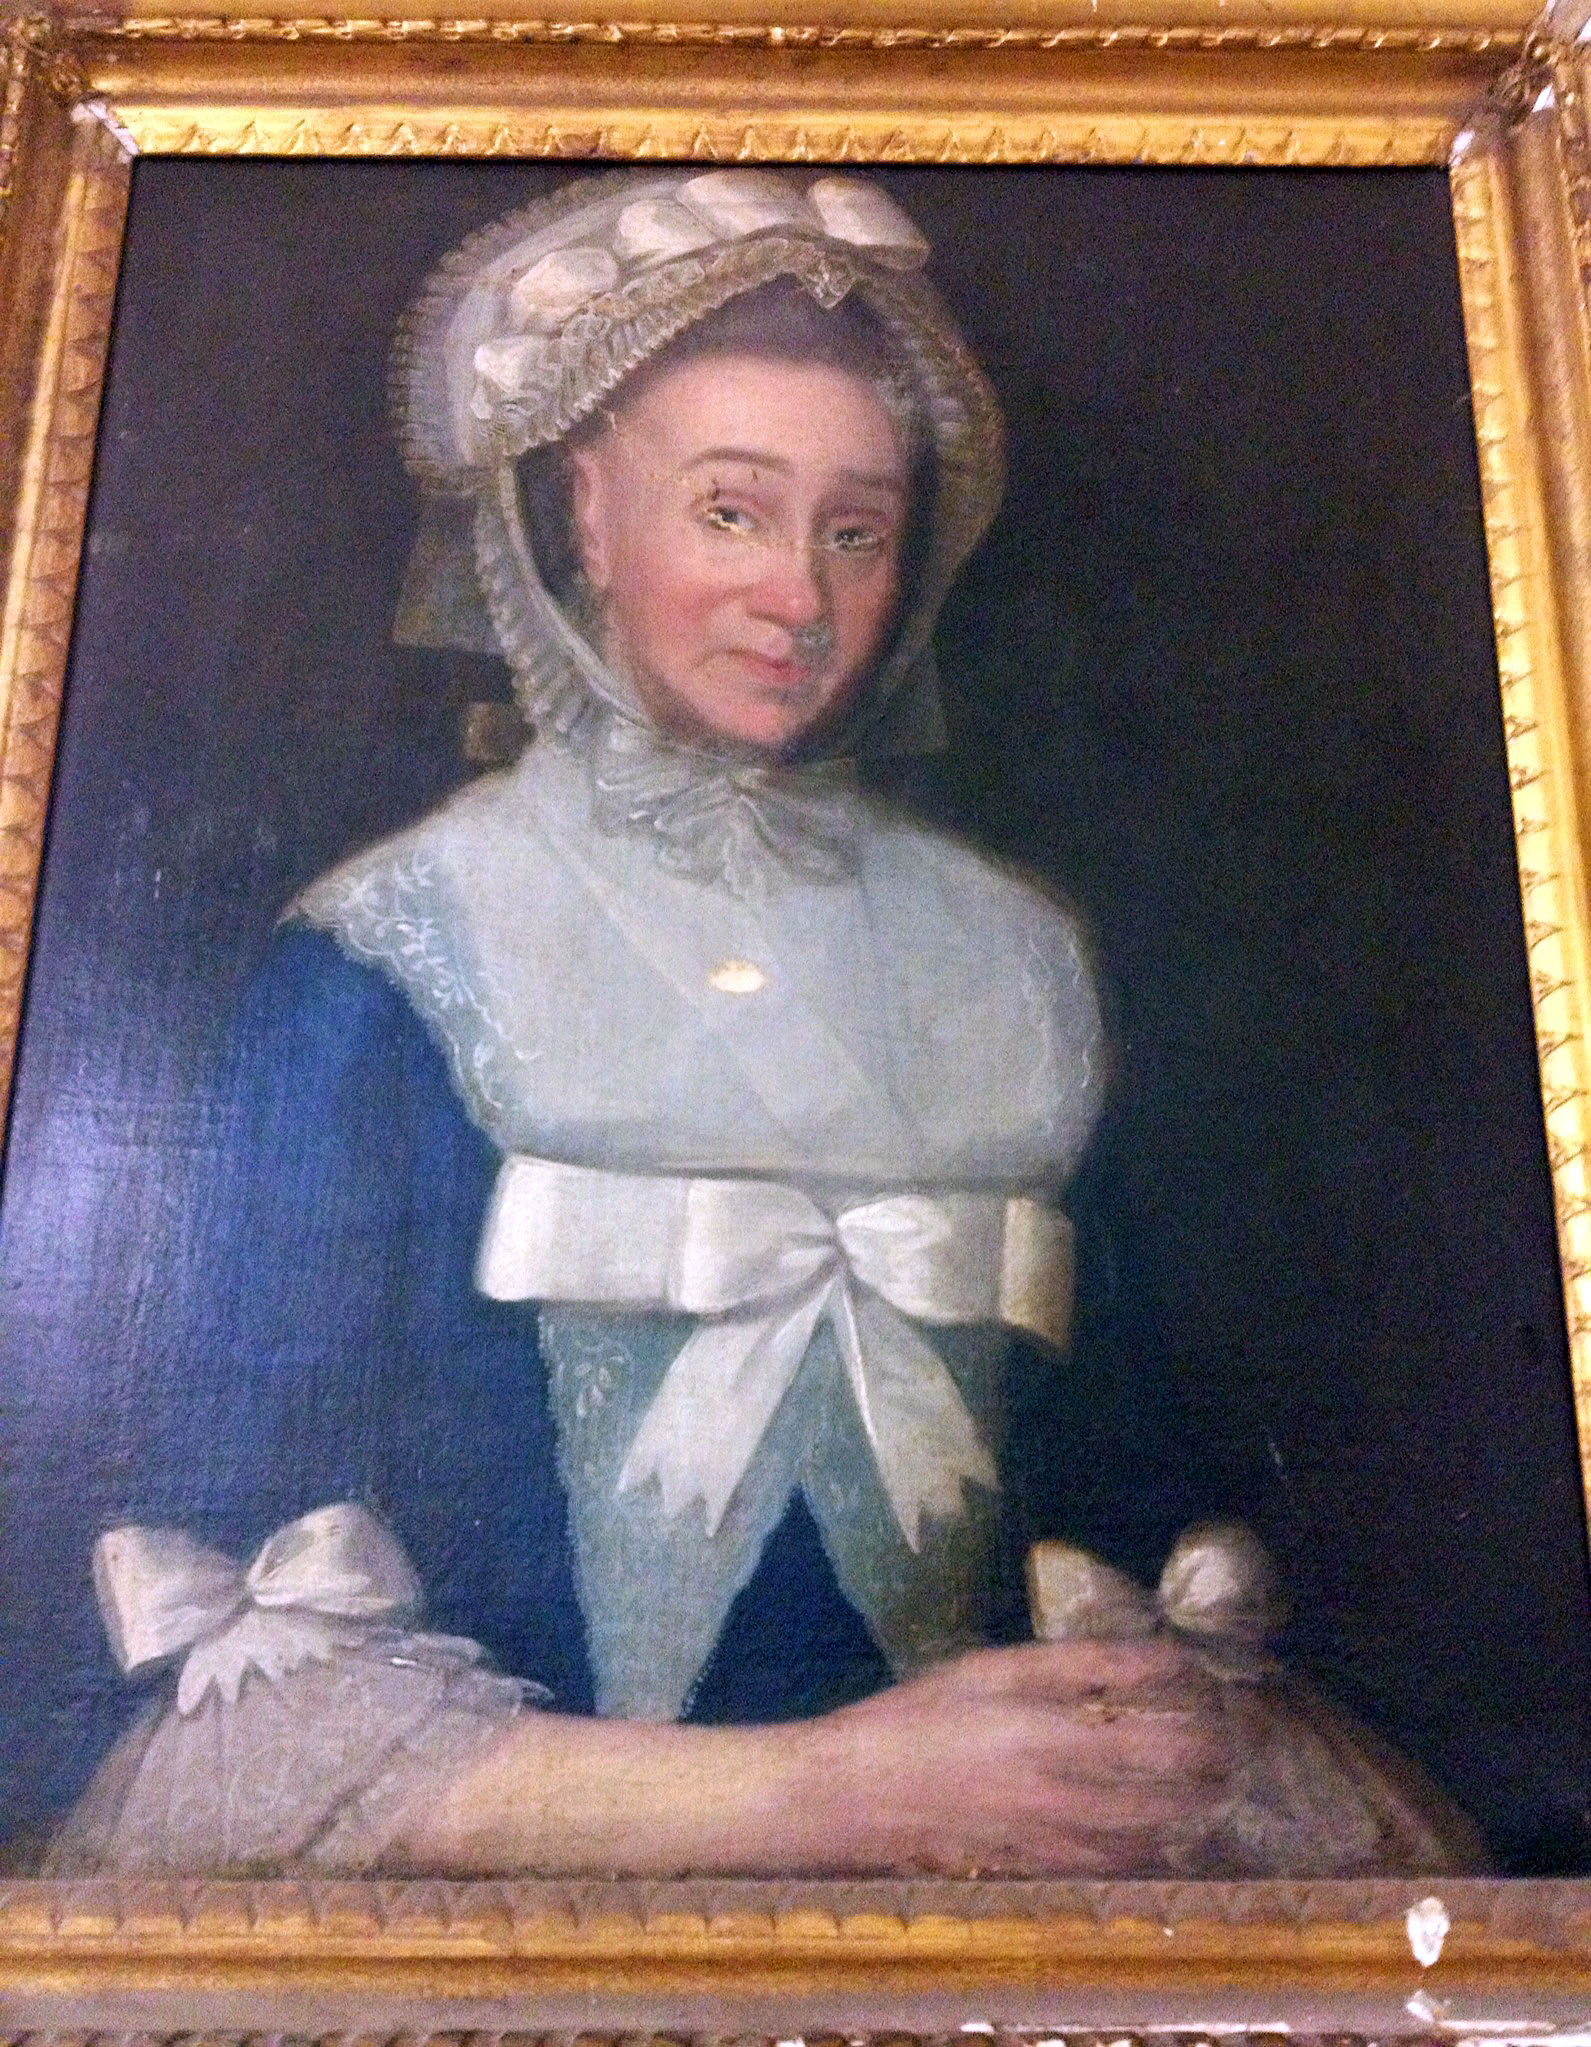 18th Century Irish / American School

"Half-length Portrait of a Lady with ruff lace bonnet, and